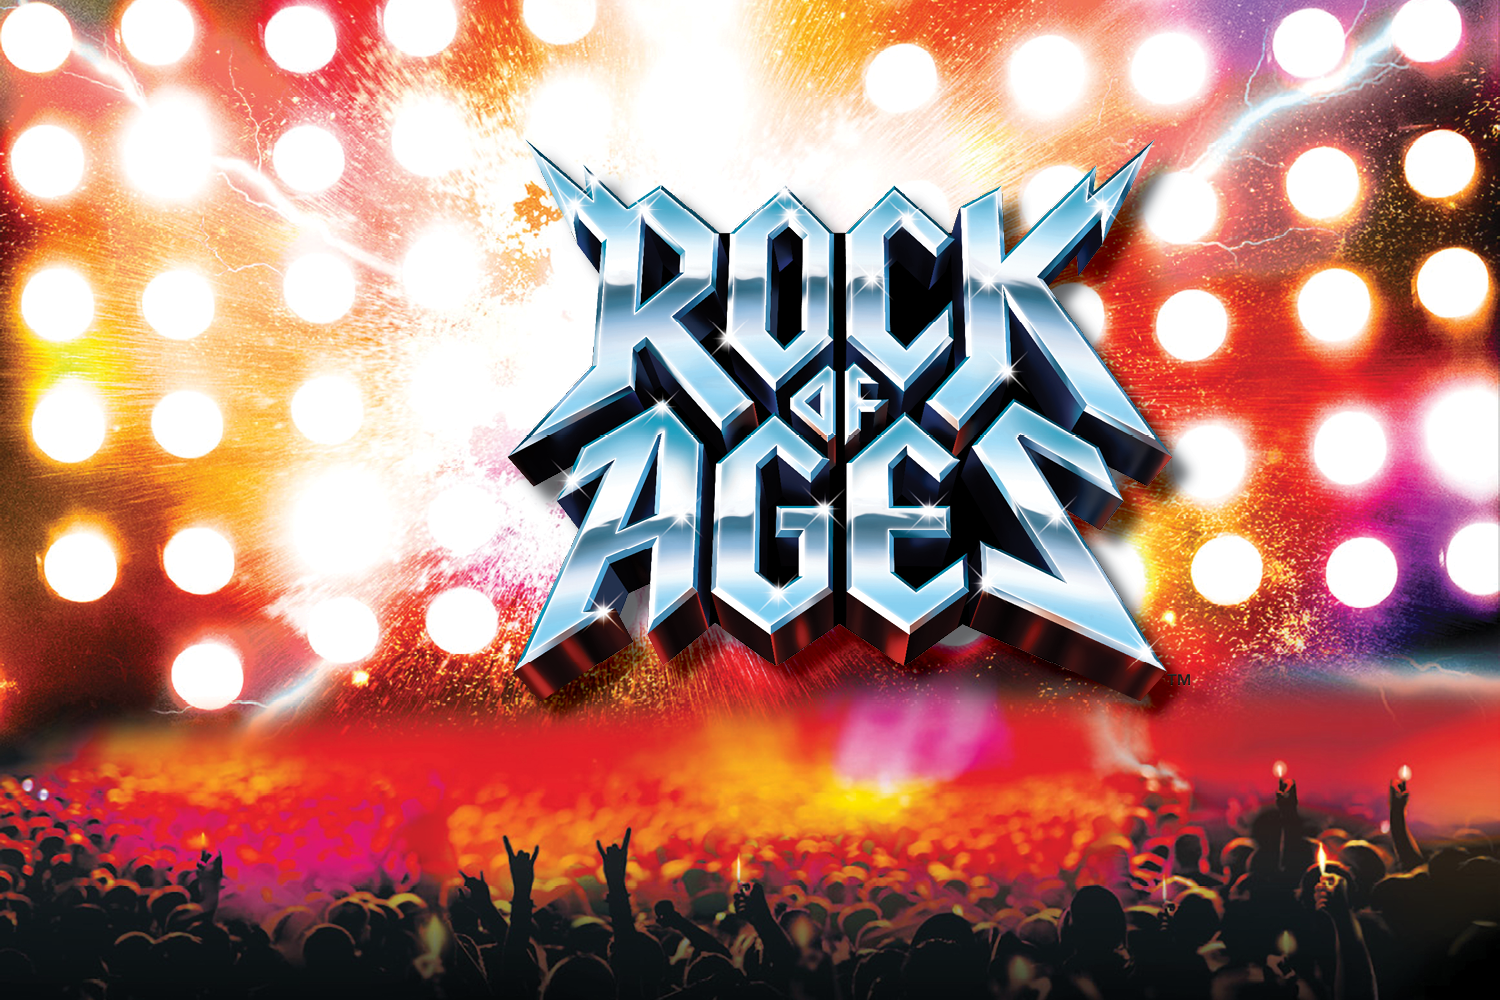 Show artwork for Rock Of Ages showing a crowd at a concert